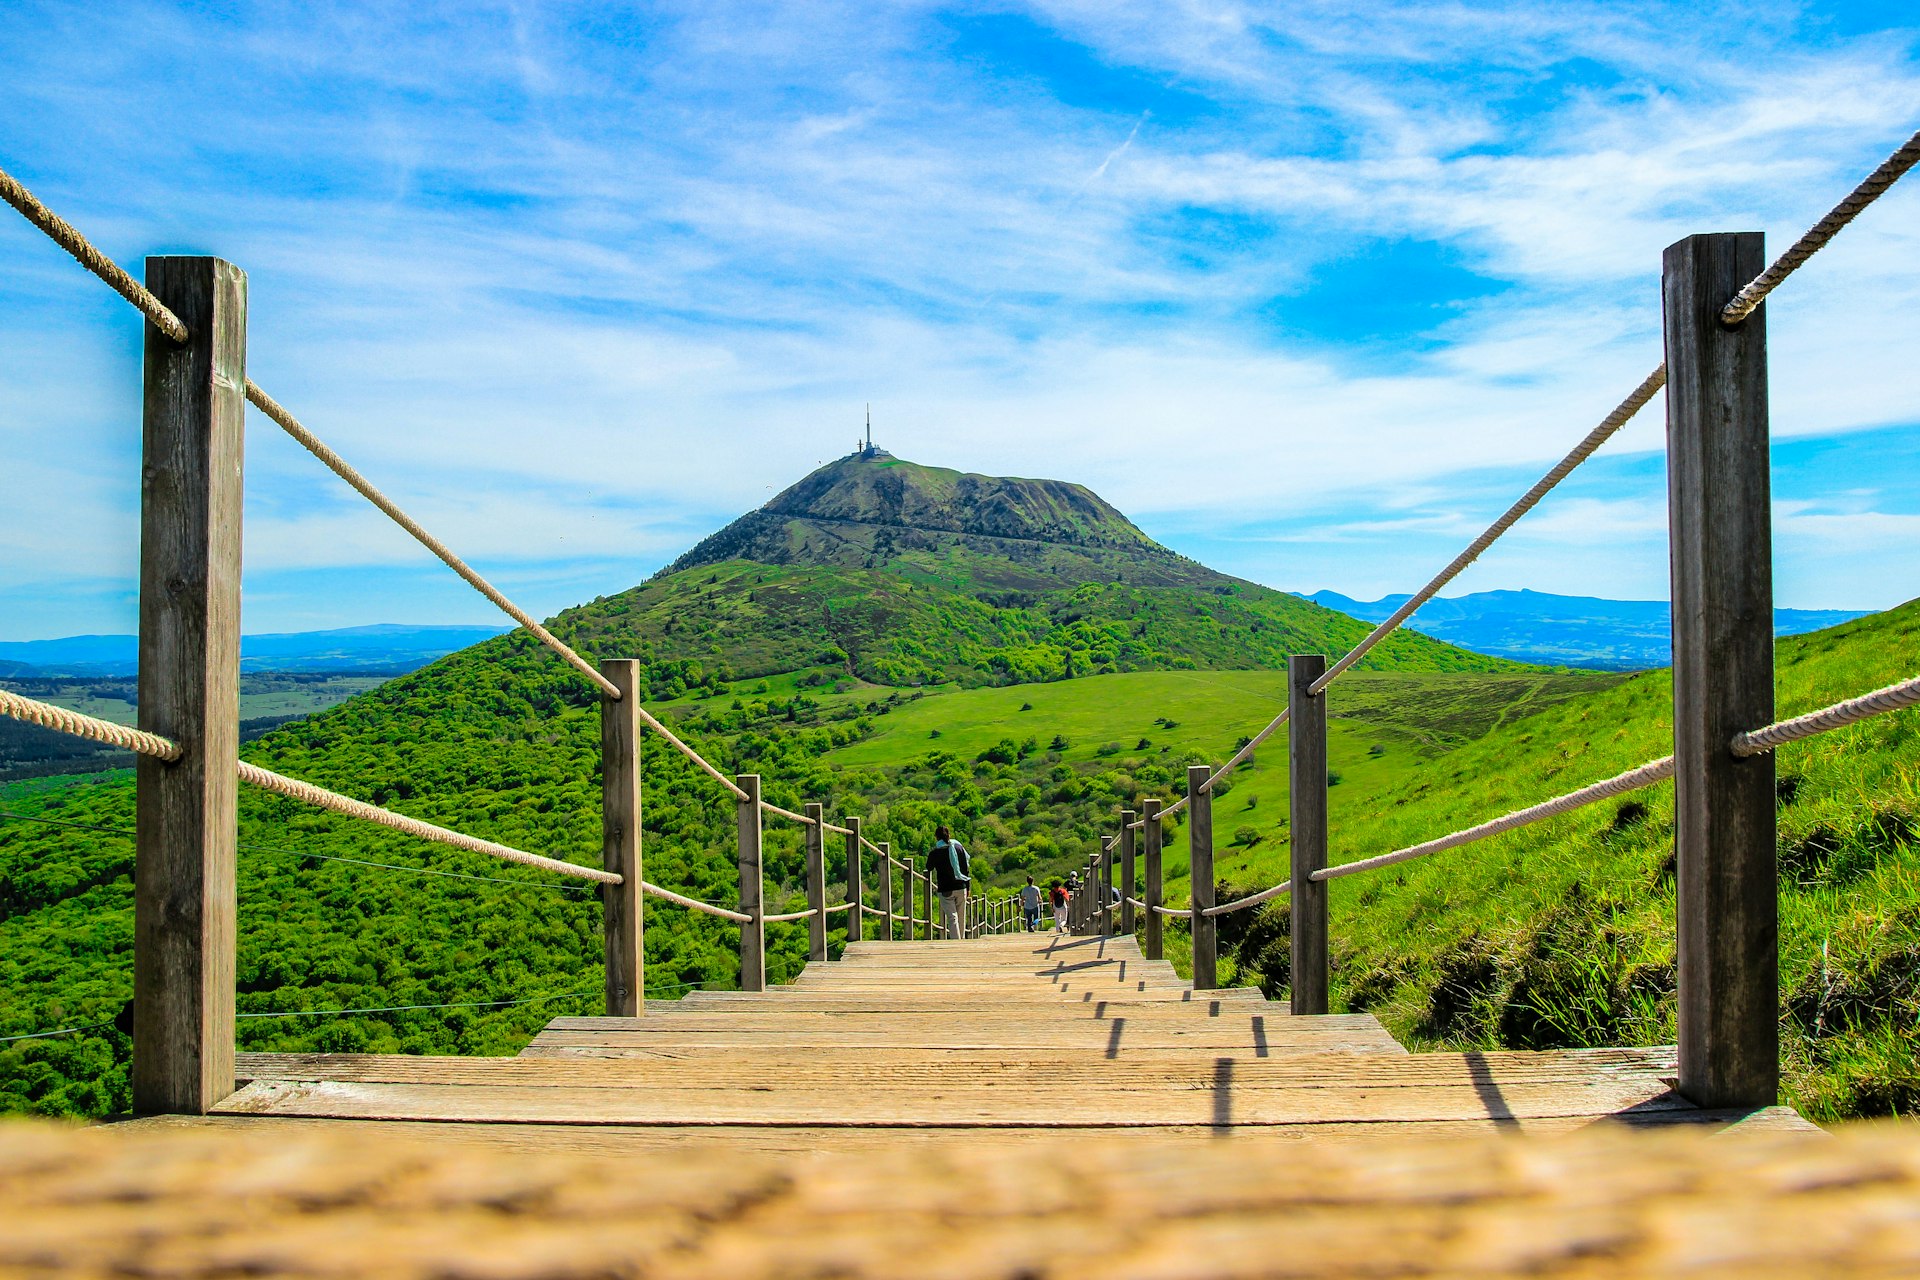 Stairs leading down towards the Puy de Dome volcano, France